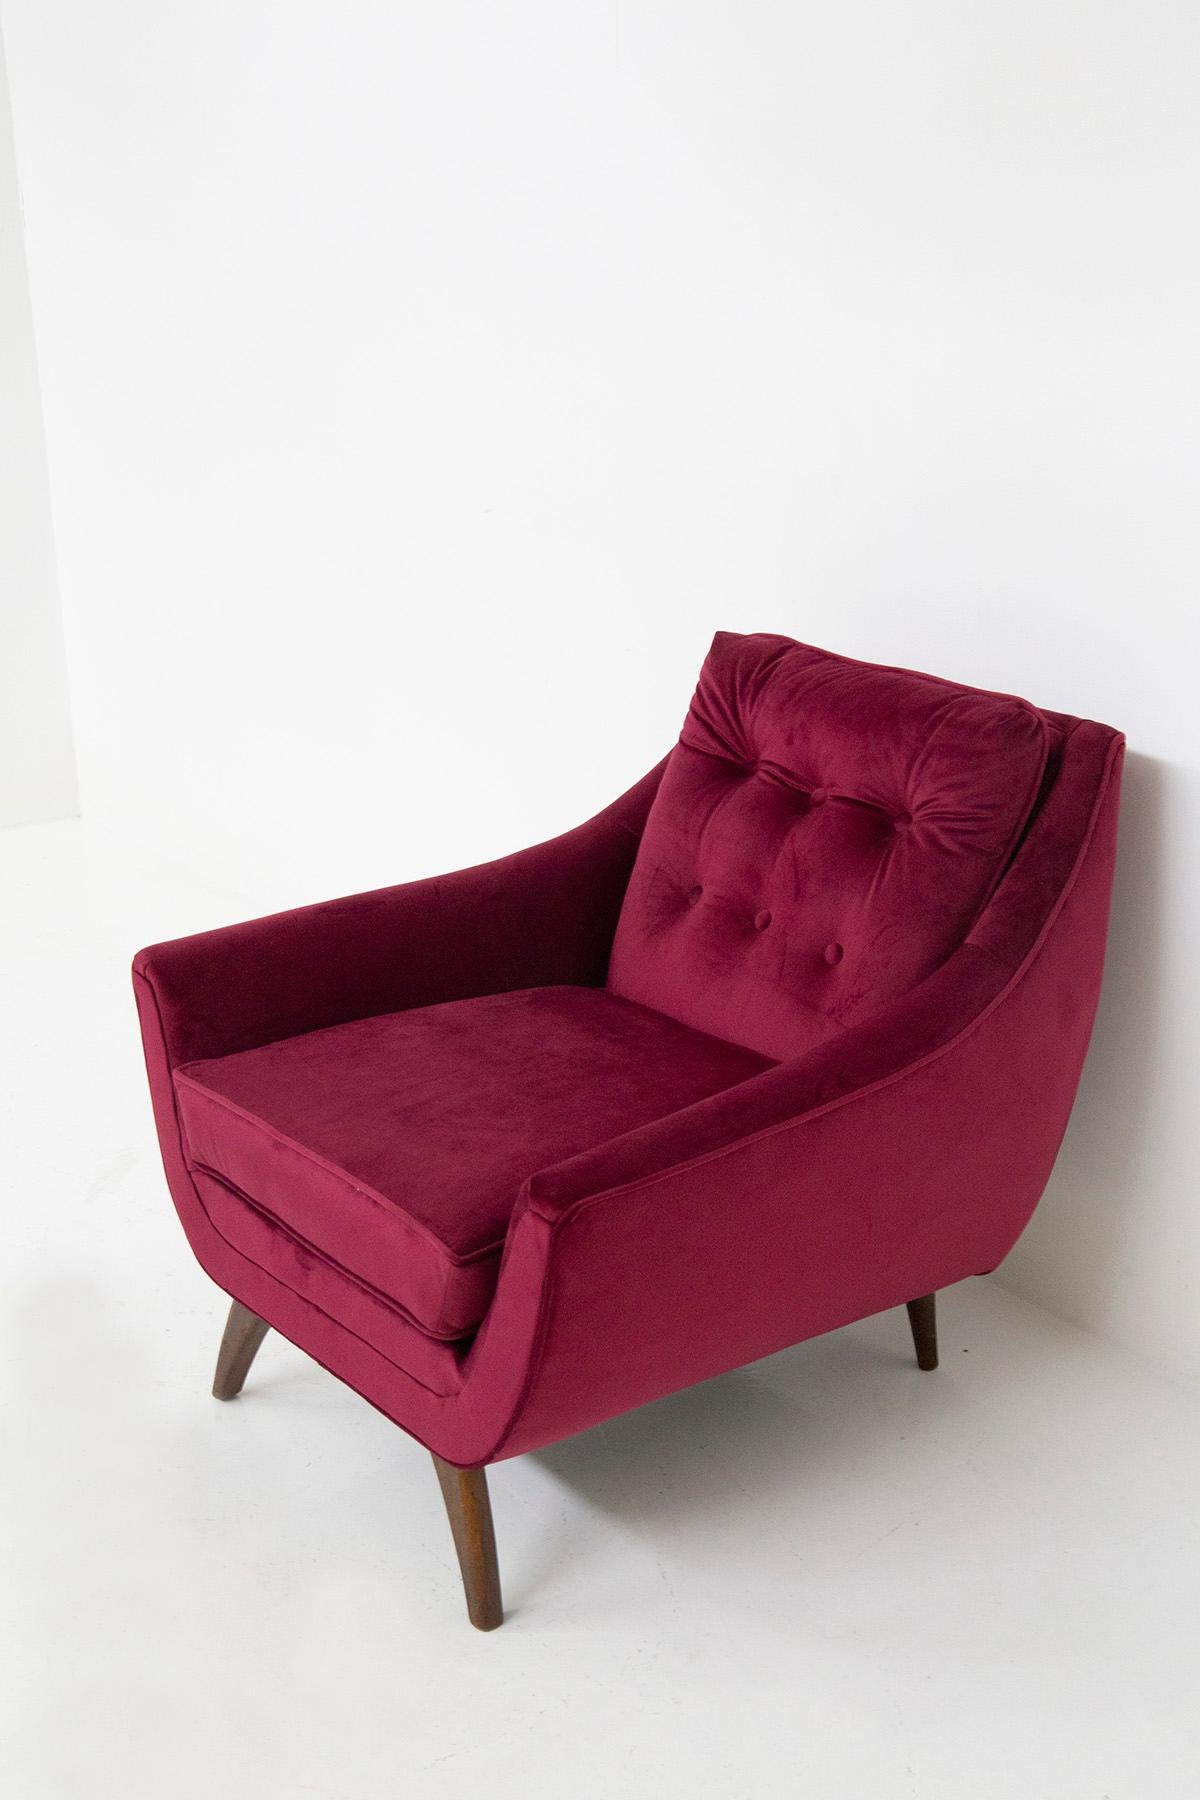 Adrian Pearsall Pair of Purple Armchairs in Velvet Him and Her For Sale 7